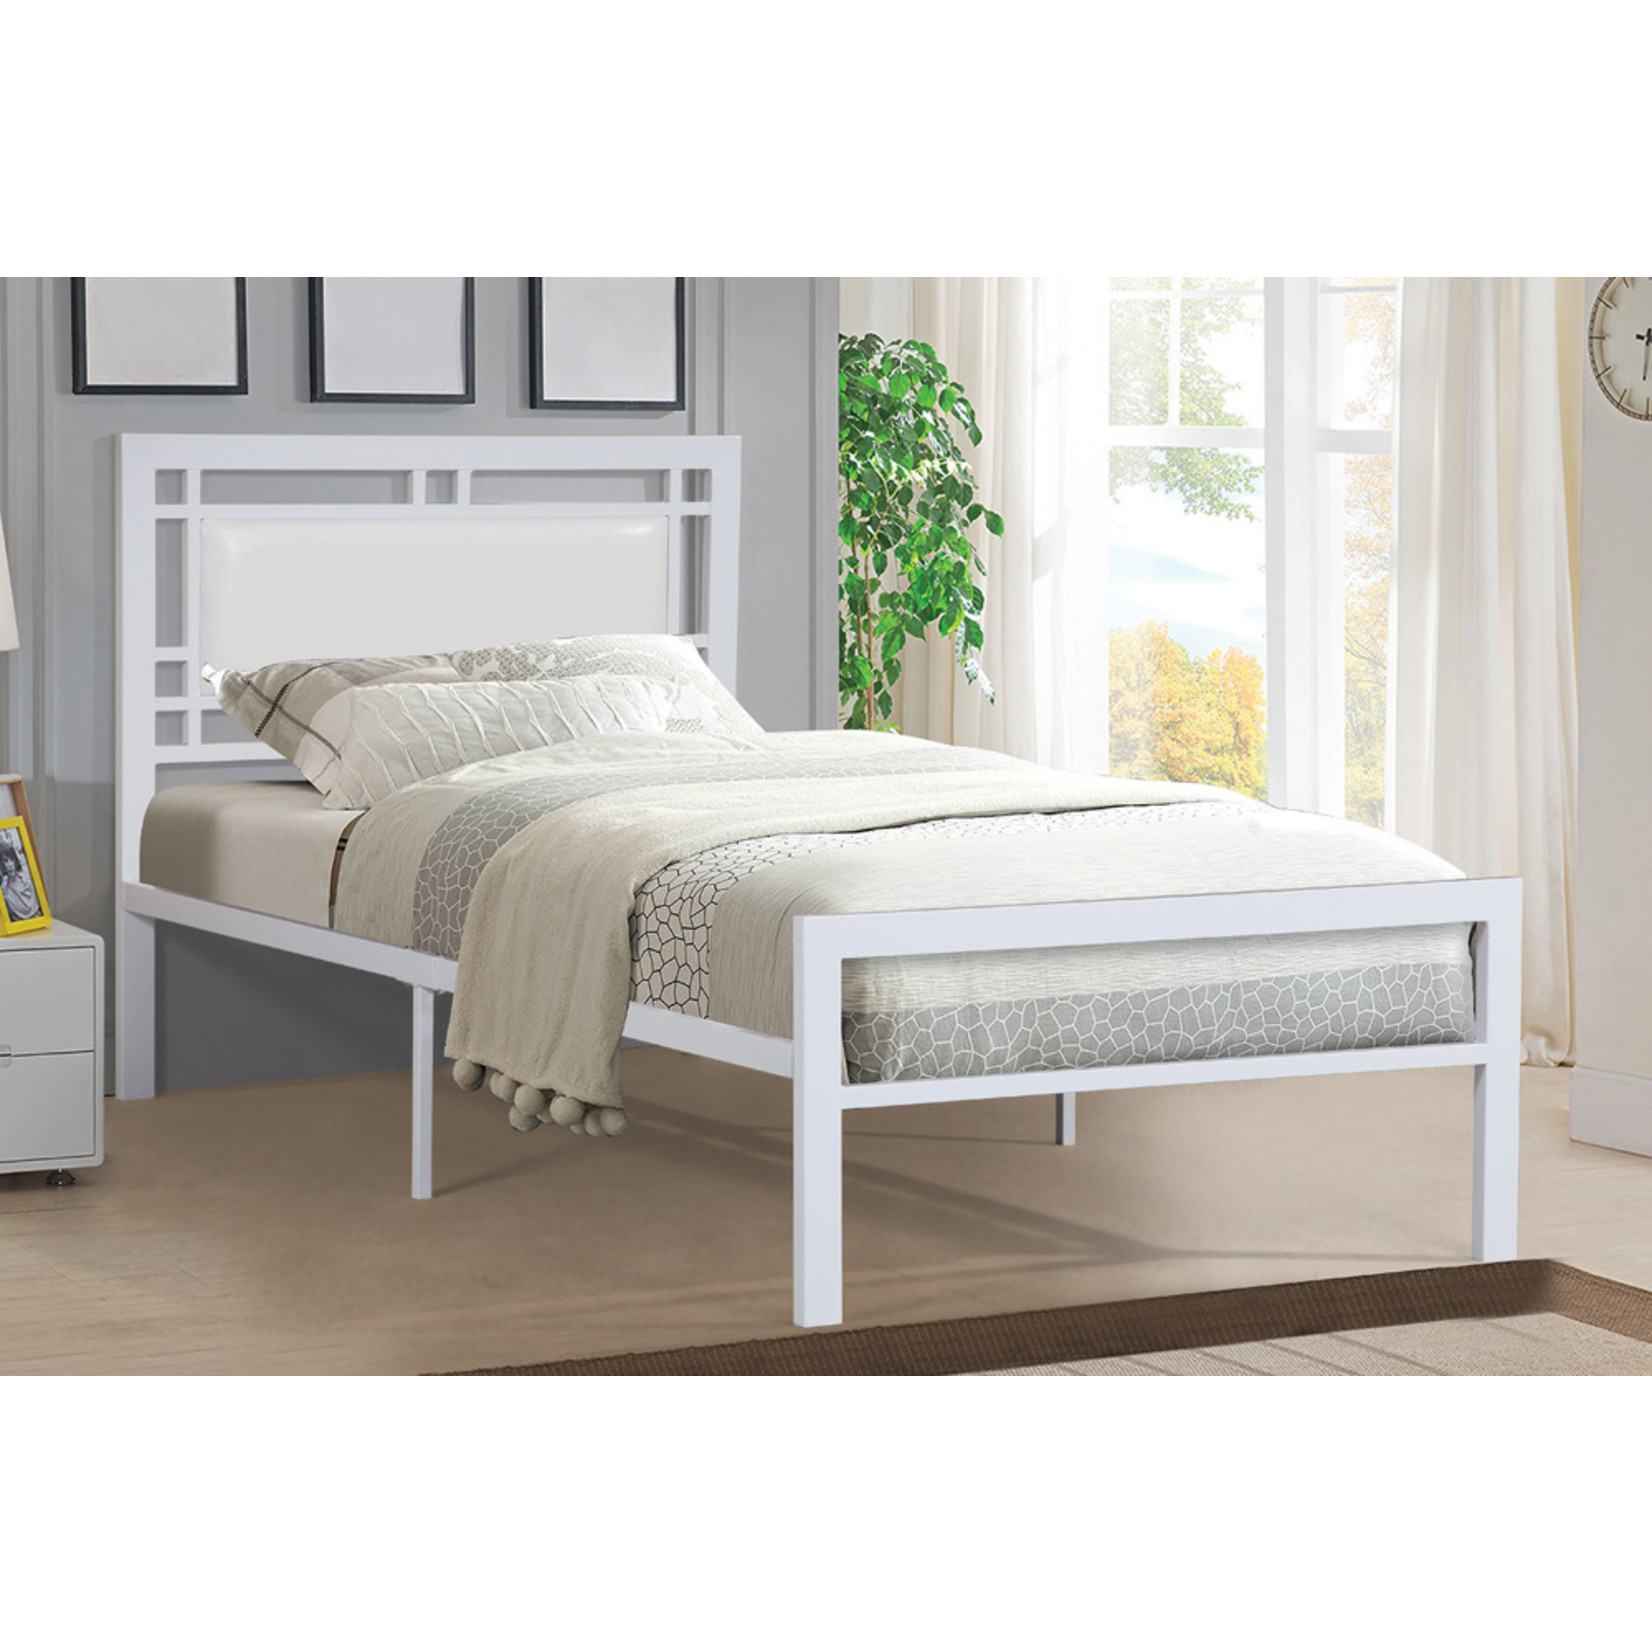 Twin White Metal Bed Frame Maison Caplan, White Metal Twin Bed